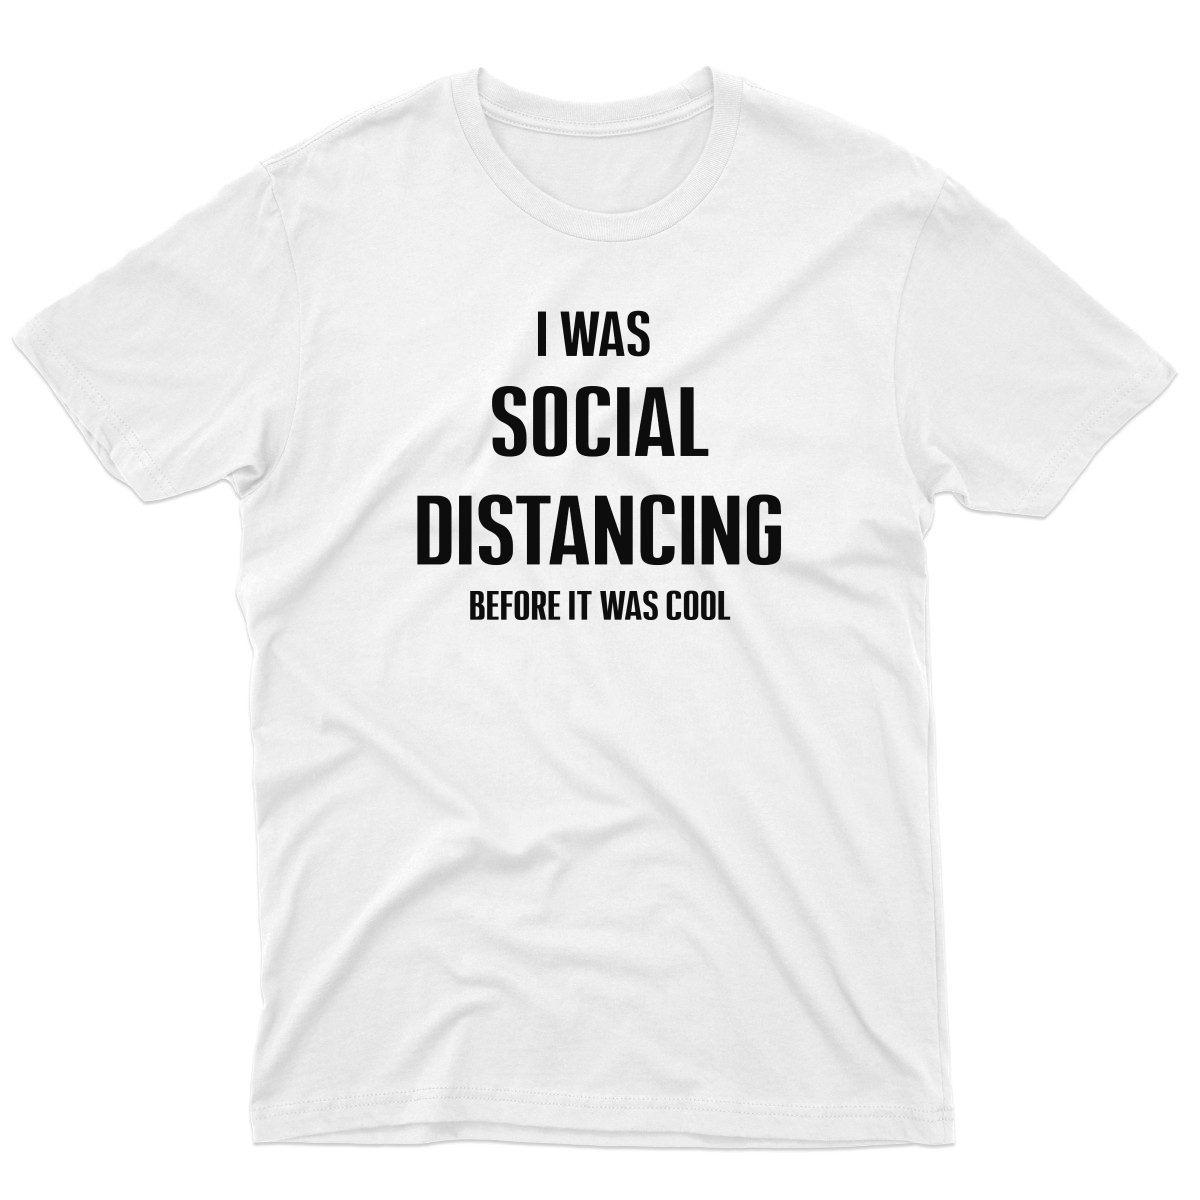 I was social distancing before it was cool Men's T-shirt | White